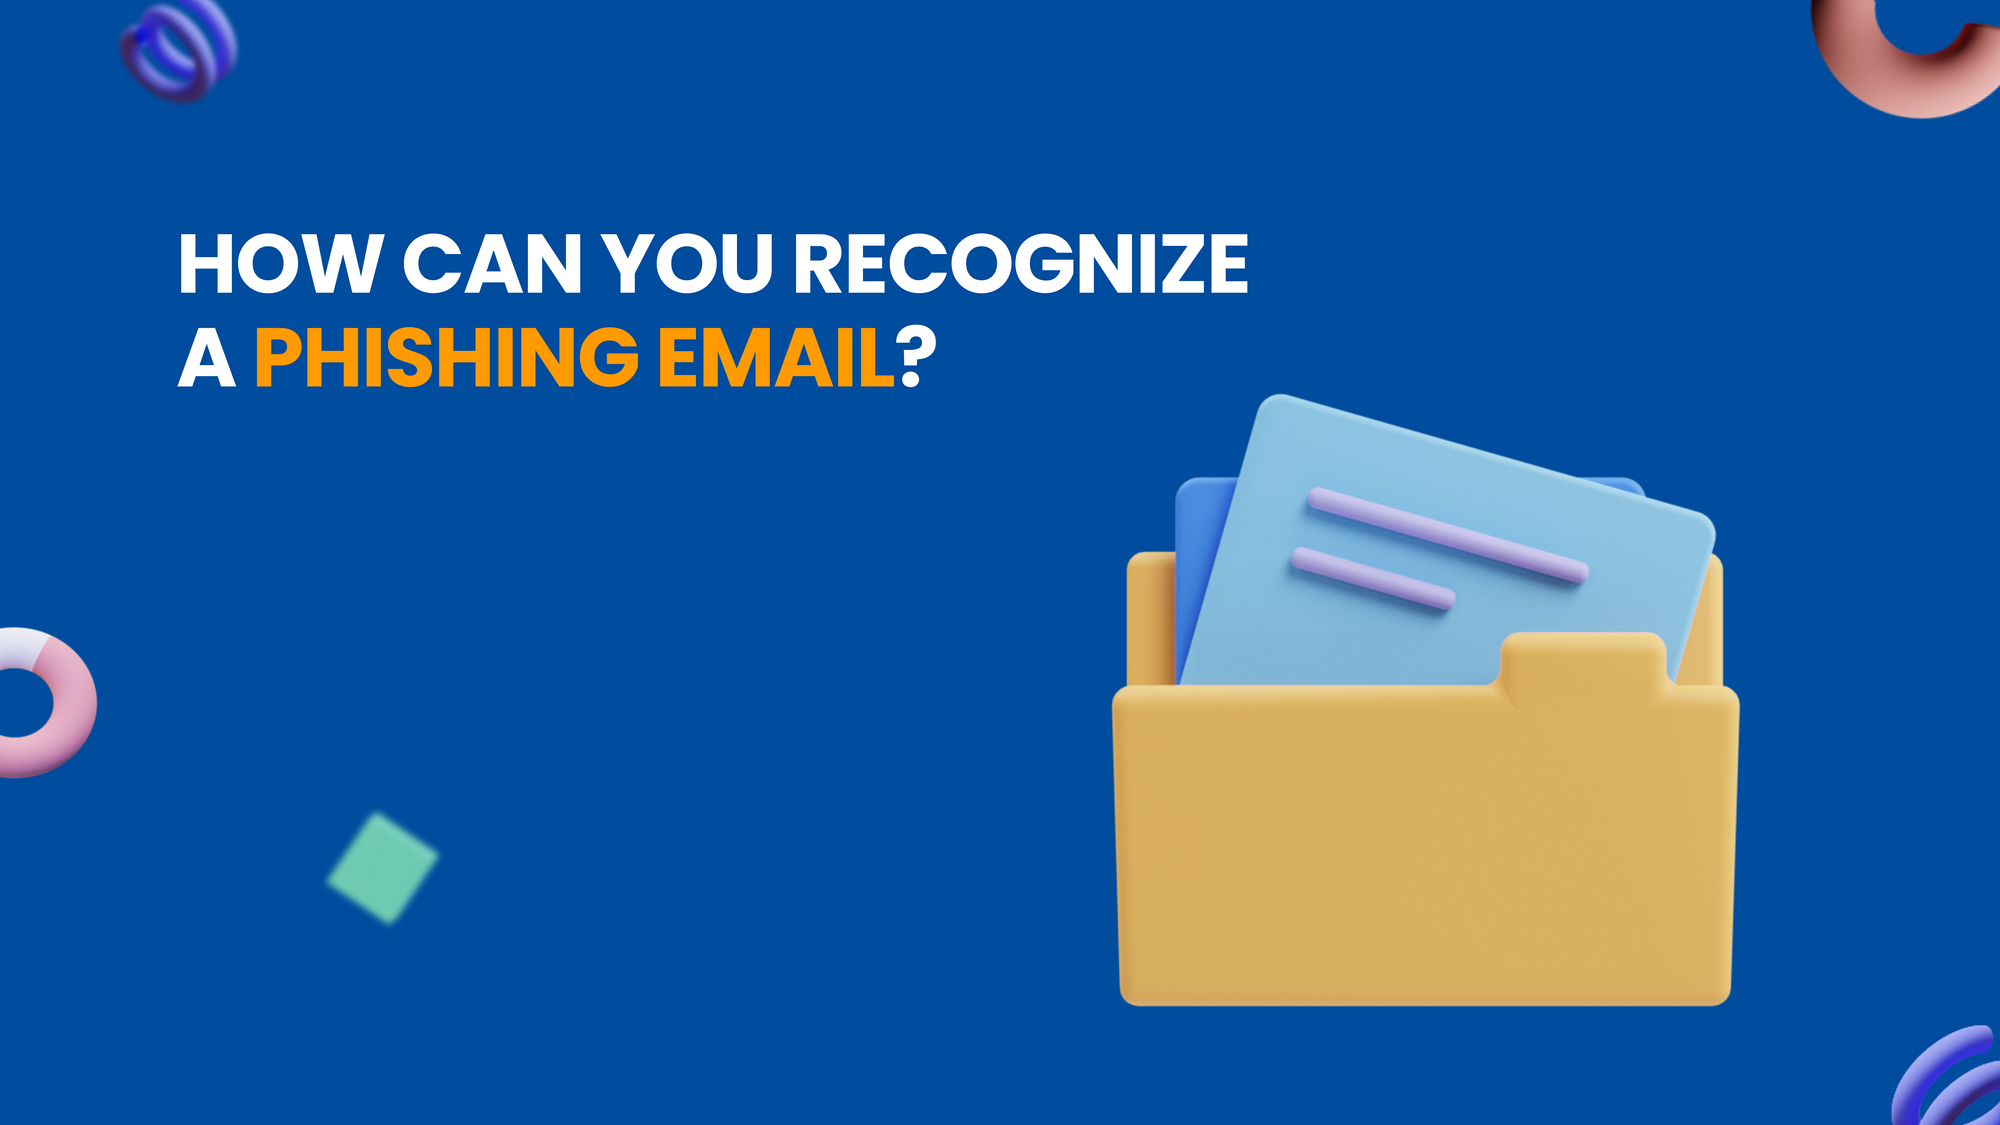 How can you recognize a phishing email?